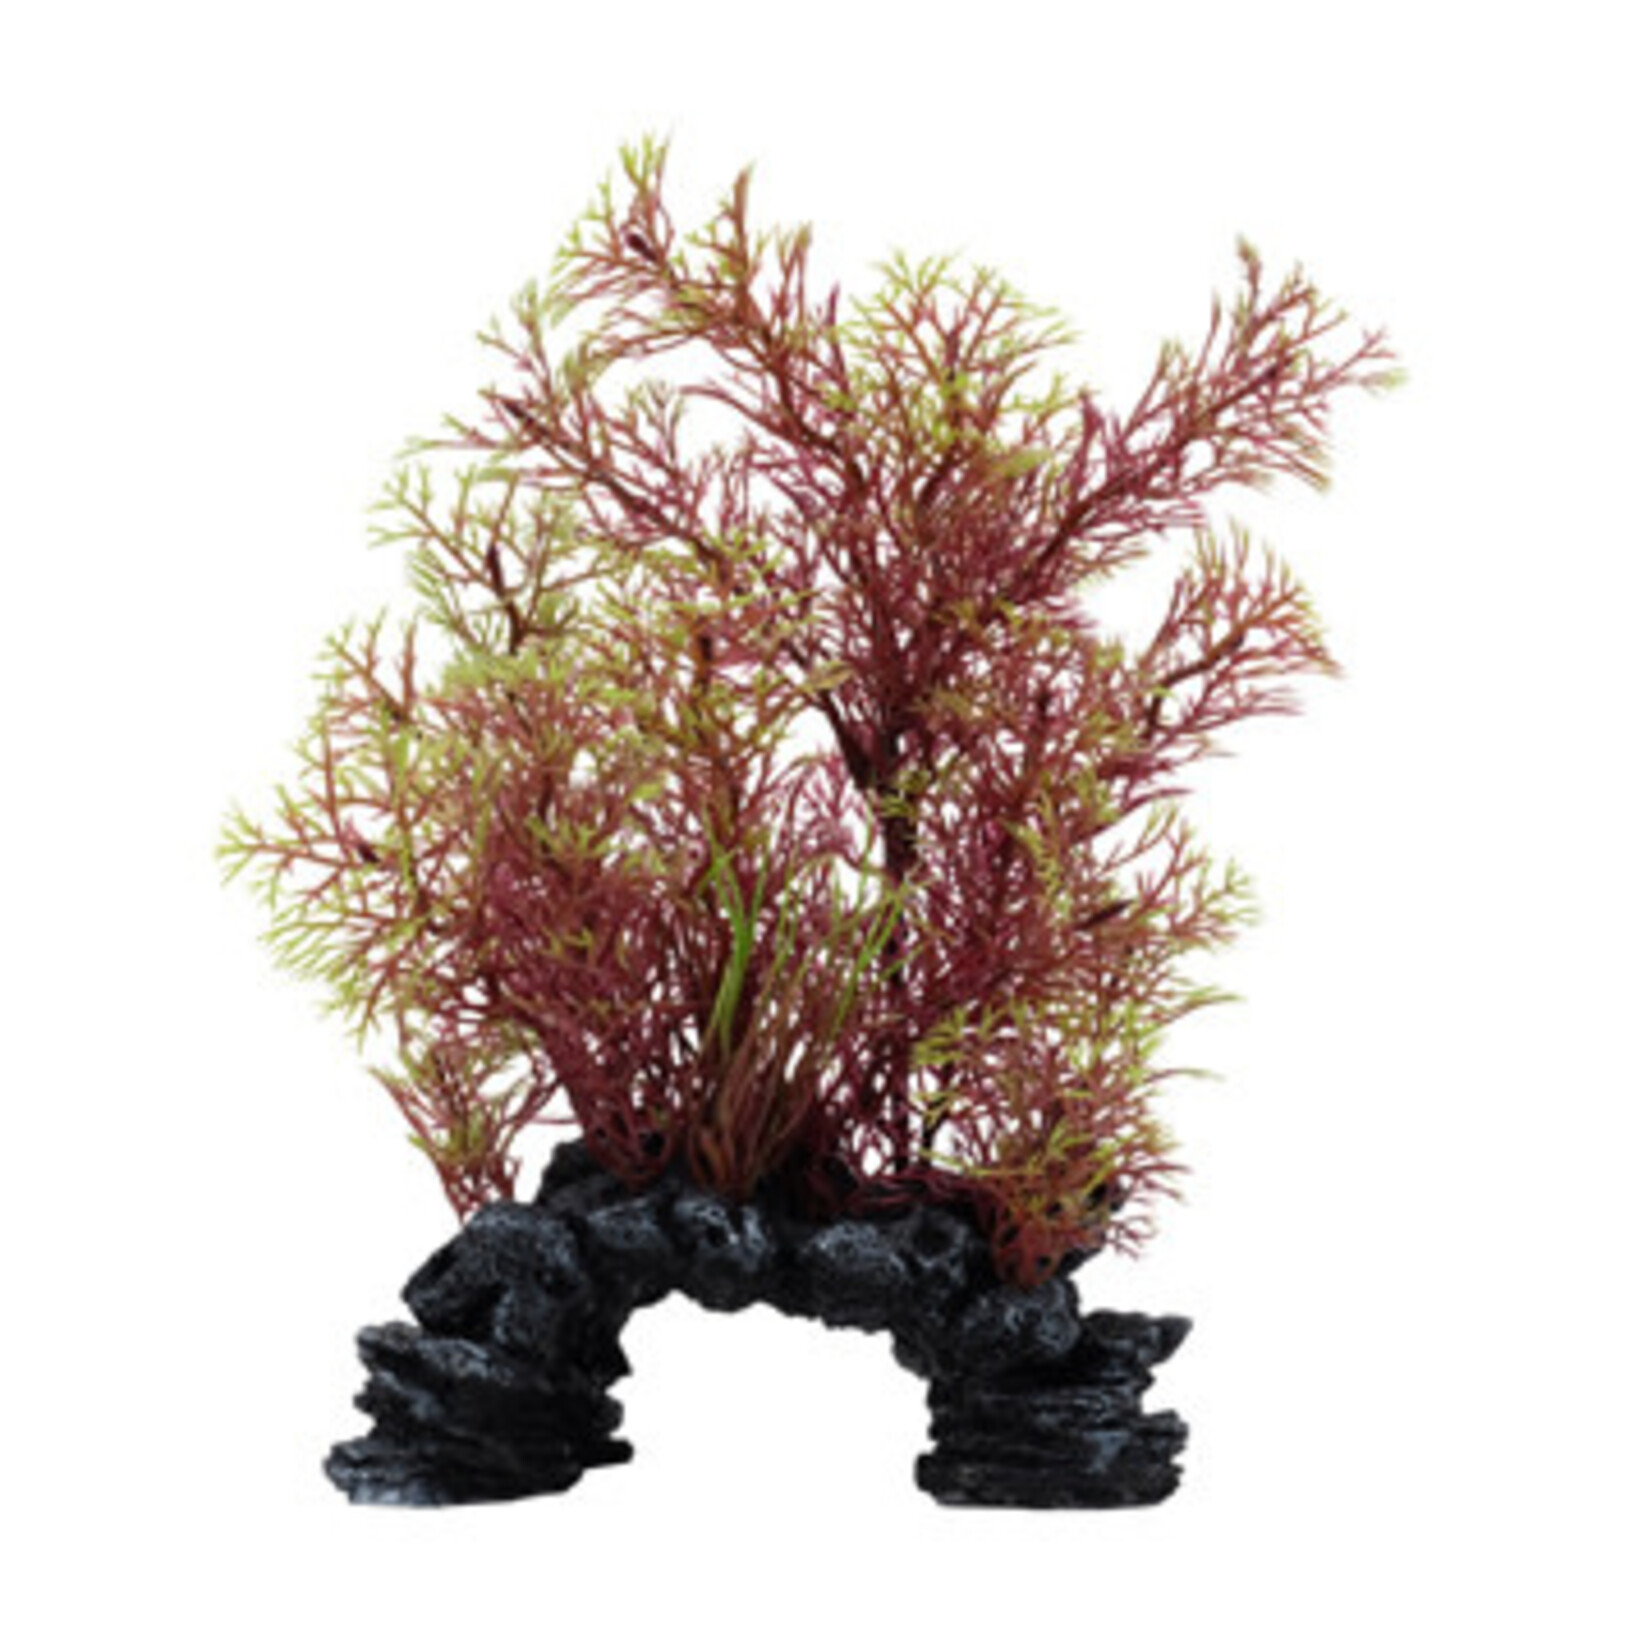 Fluval Fluval Aqualife Deco Scapes Red/Green Foxtail Mix - 15-20 cm (6-8 in)